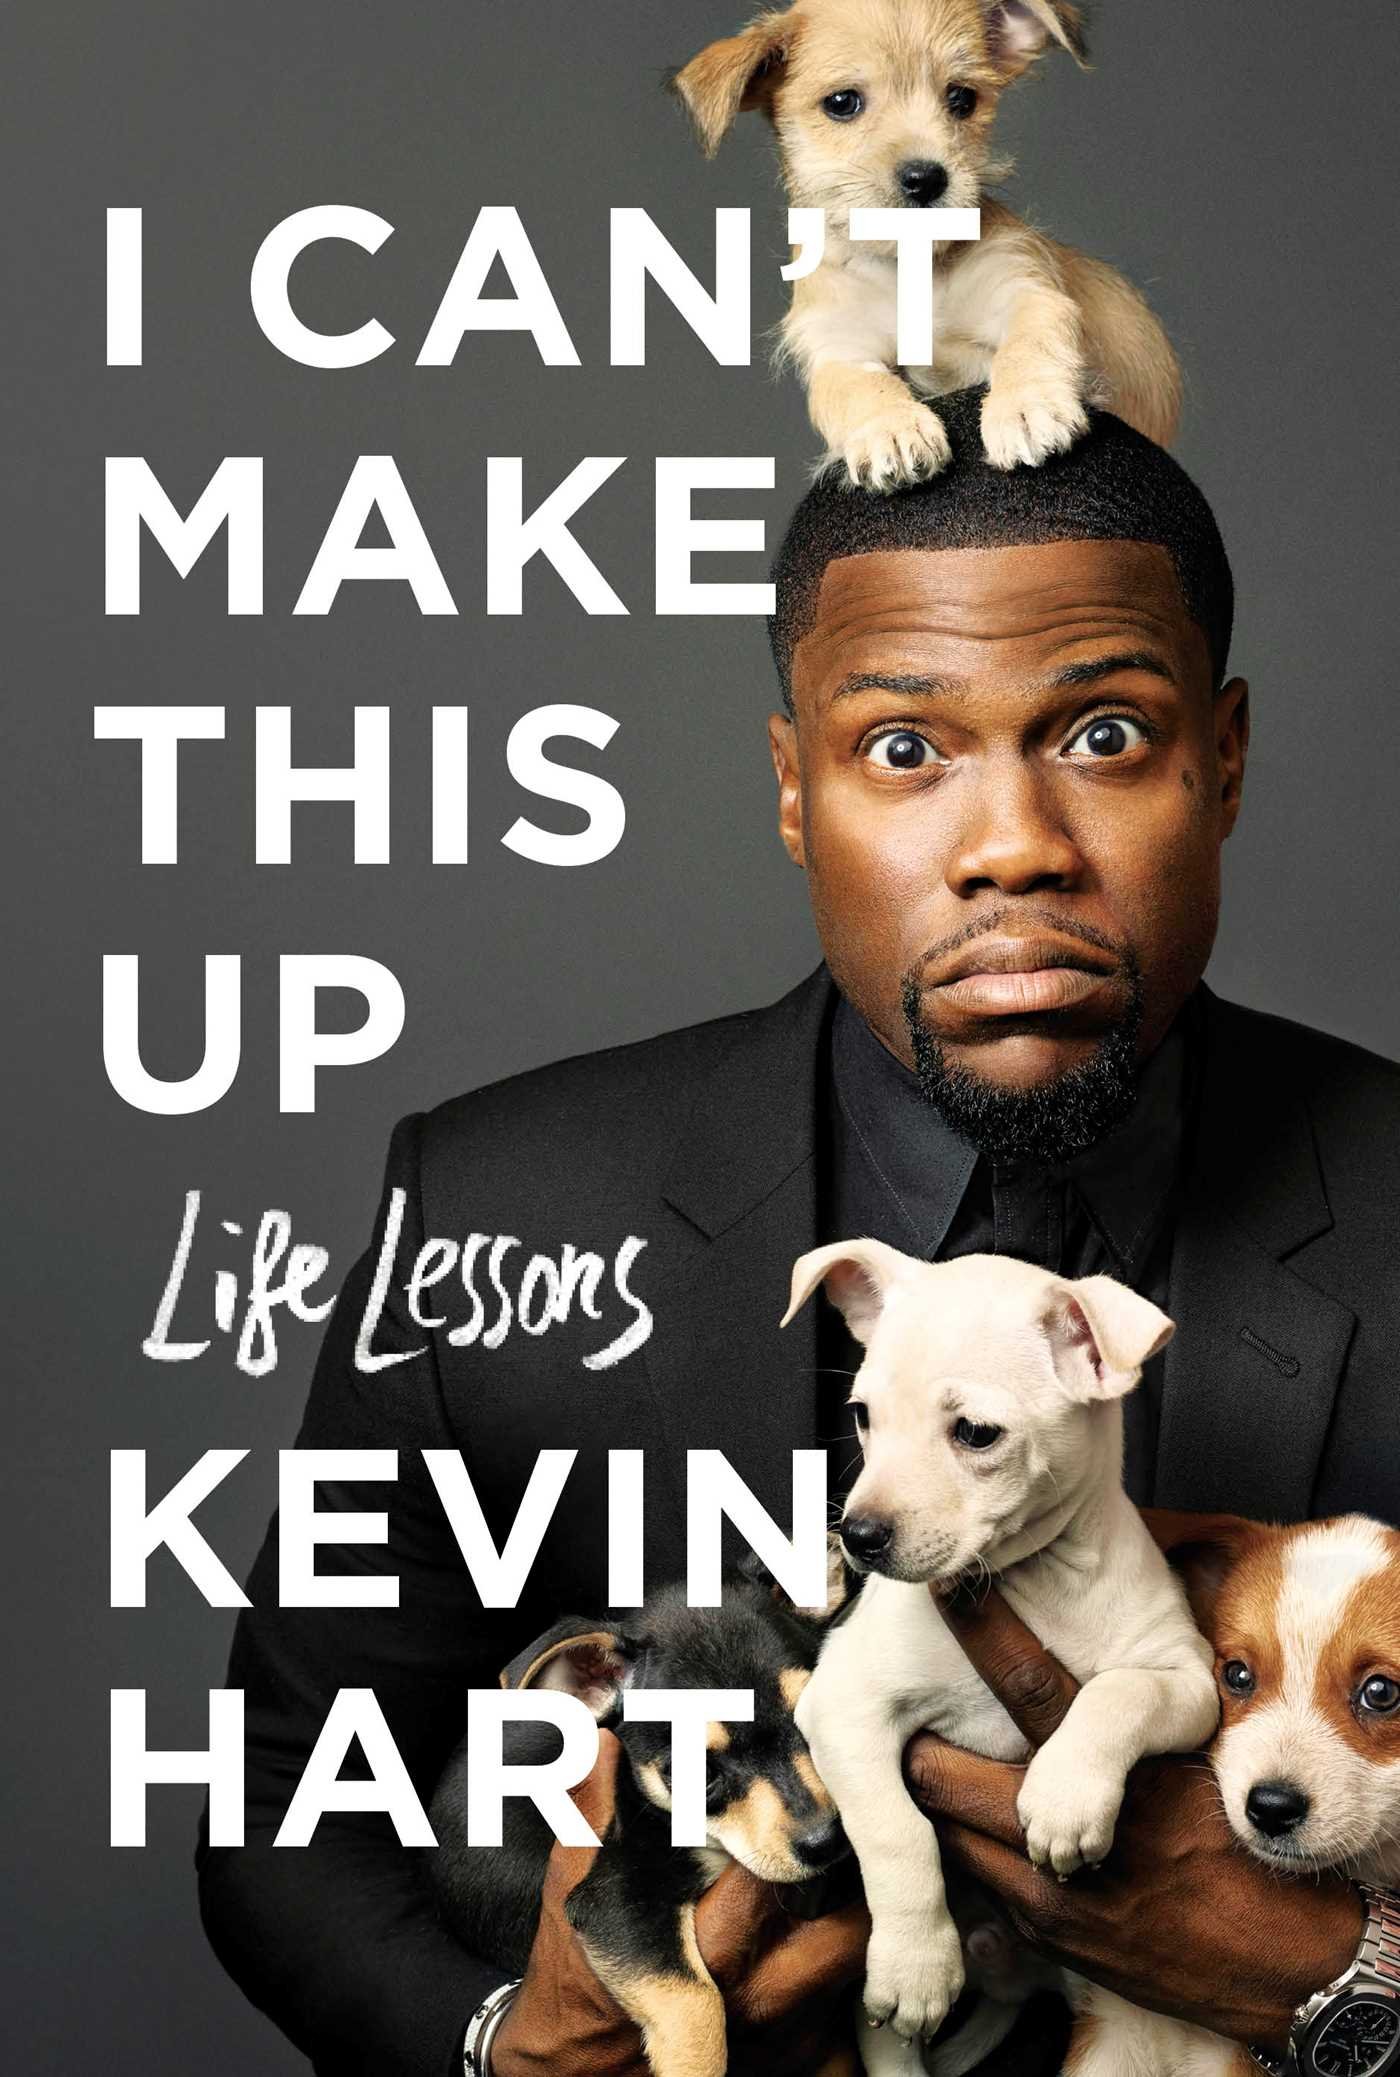 6. ‘I Can’t Make This Up’ by Kevin Hart